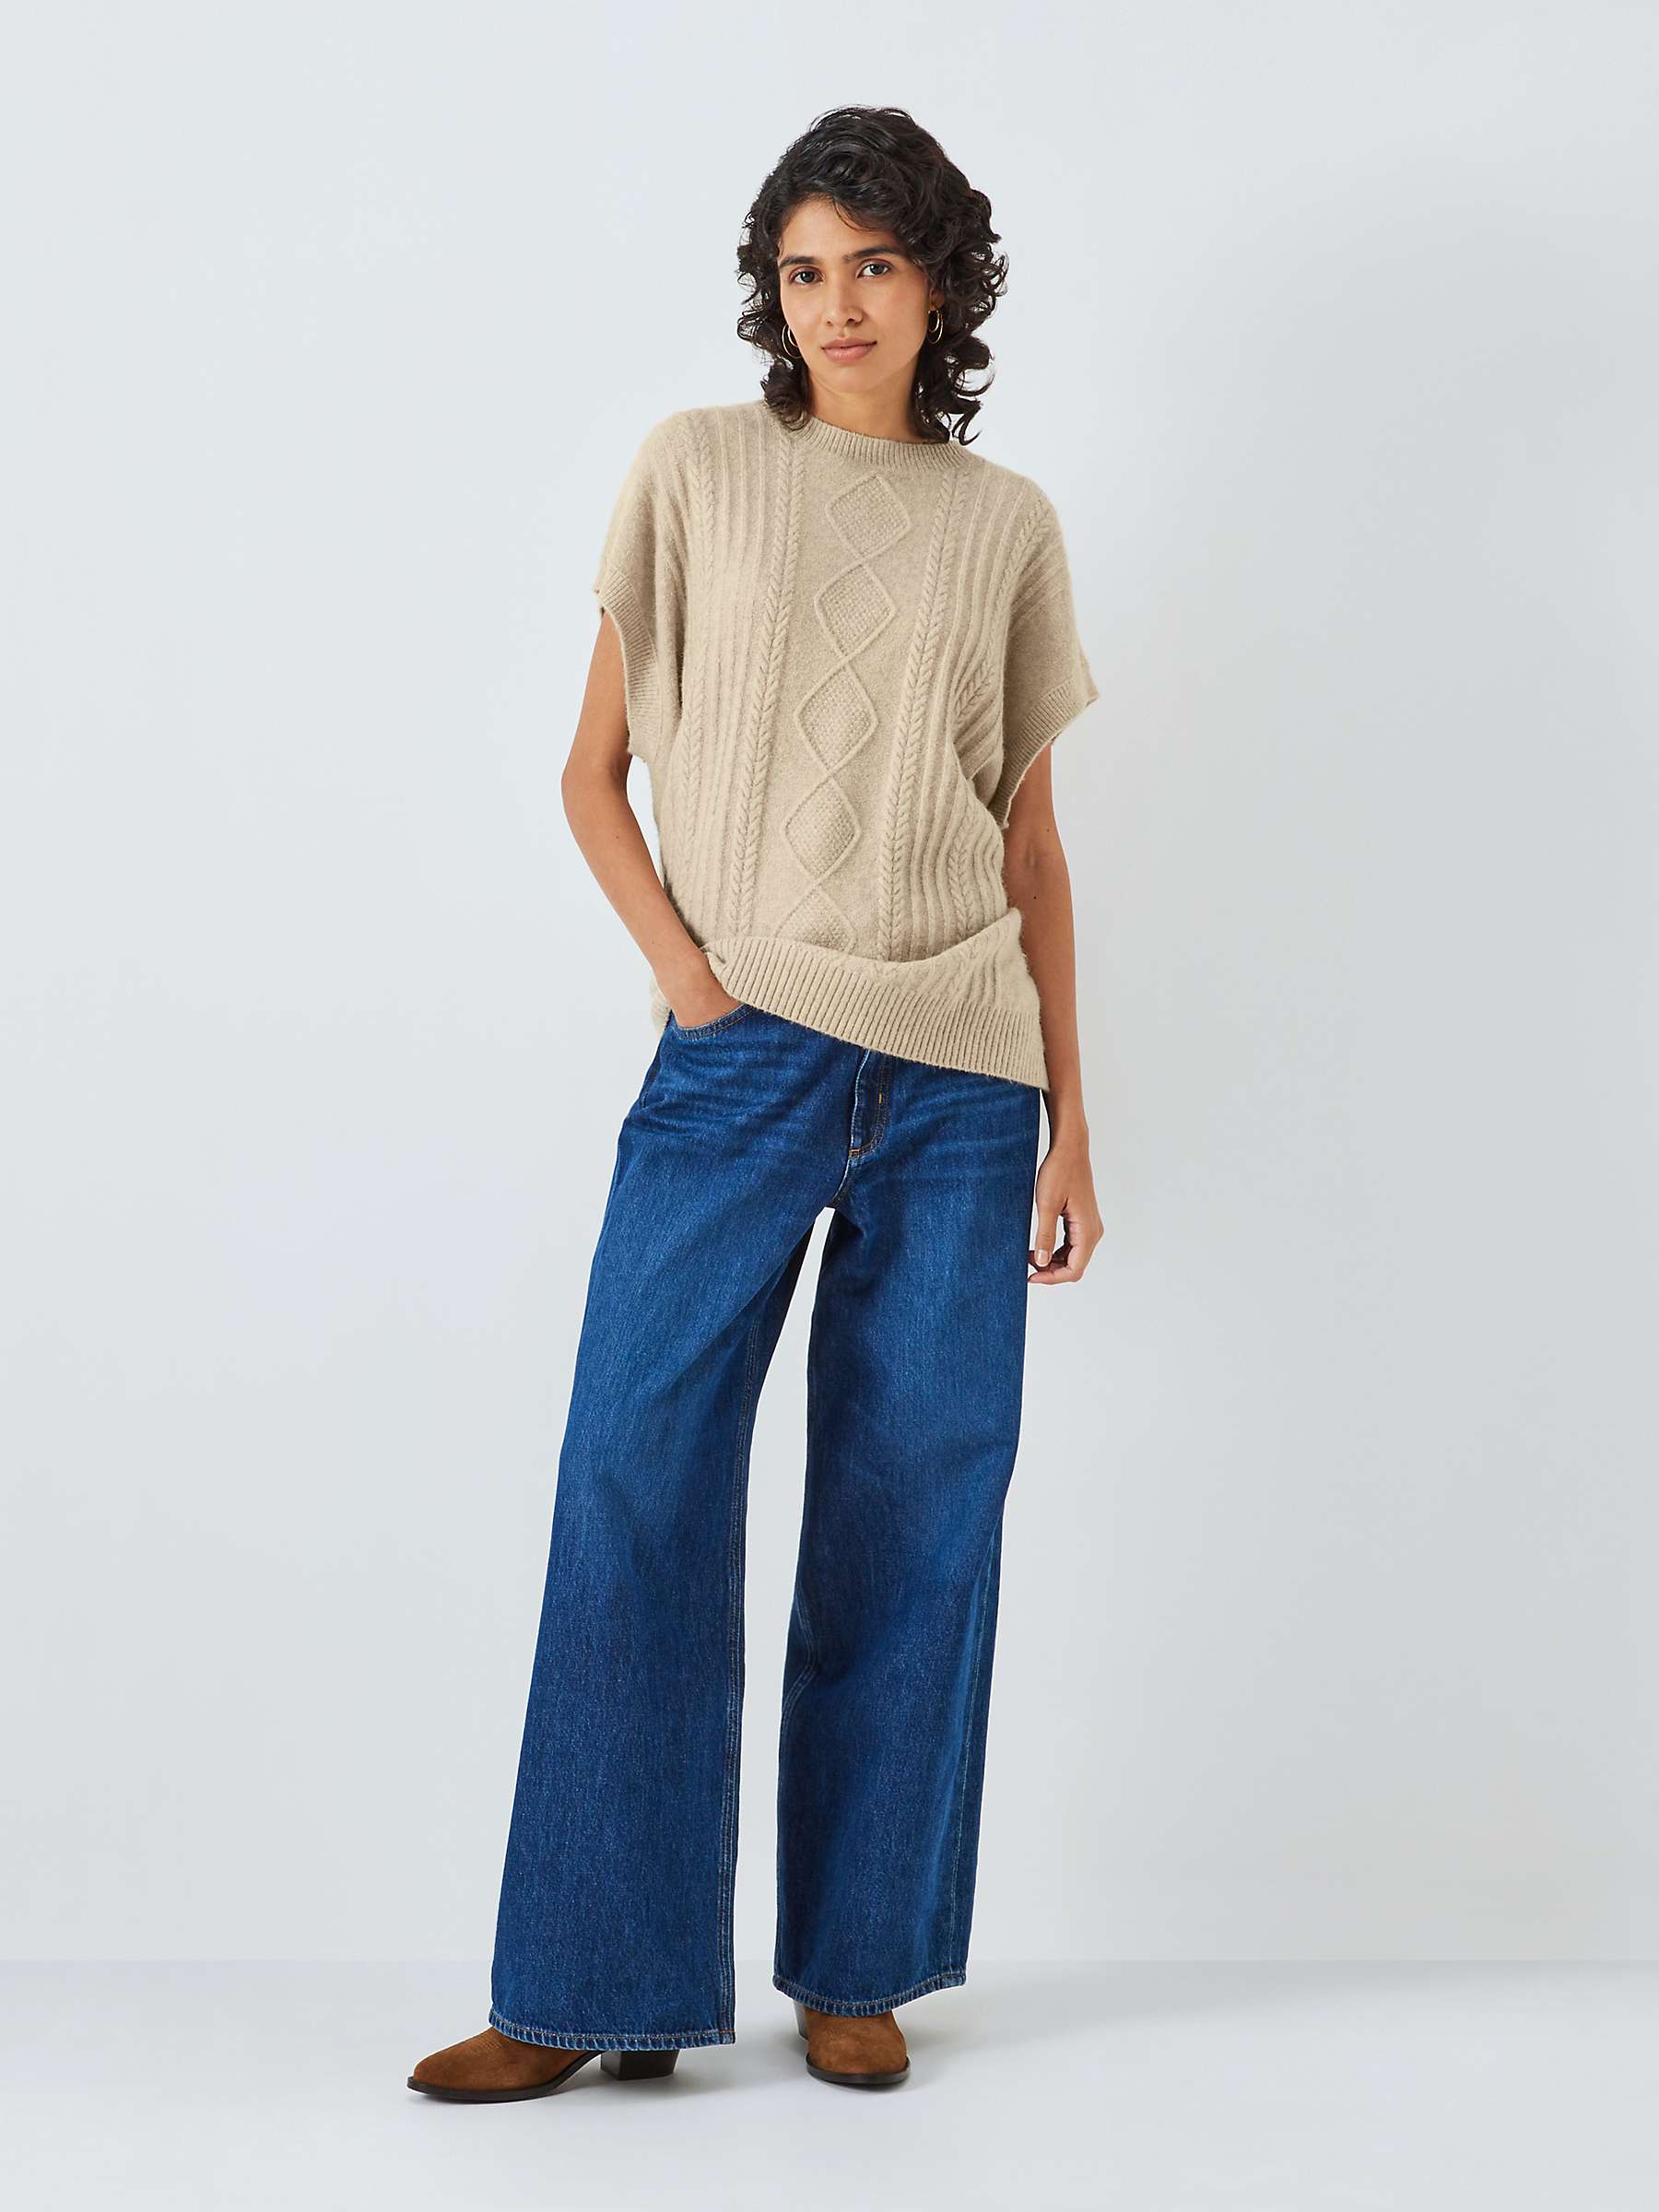 AND/OR Estelle Cable Sleeveless Jumper, Oatmeal at John Lewis & Partners